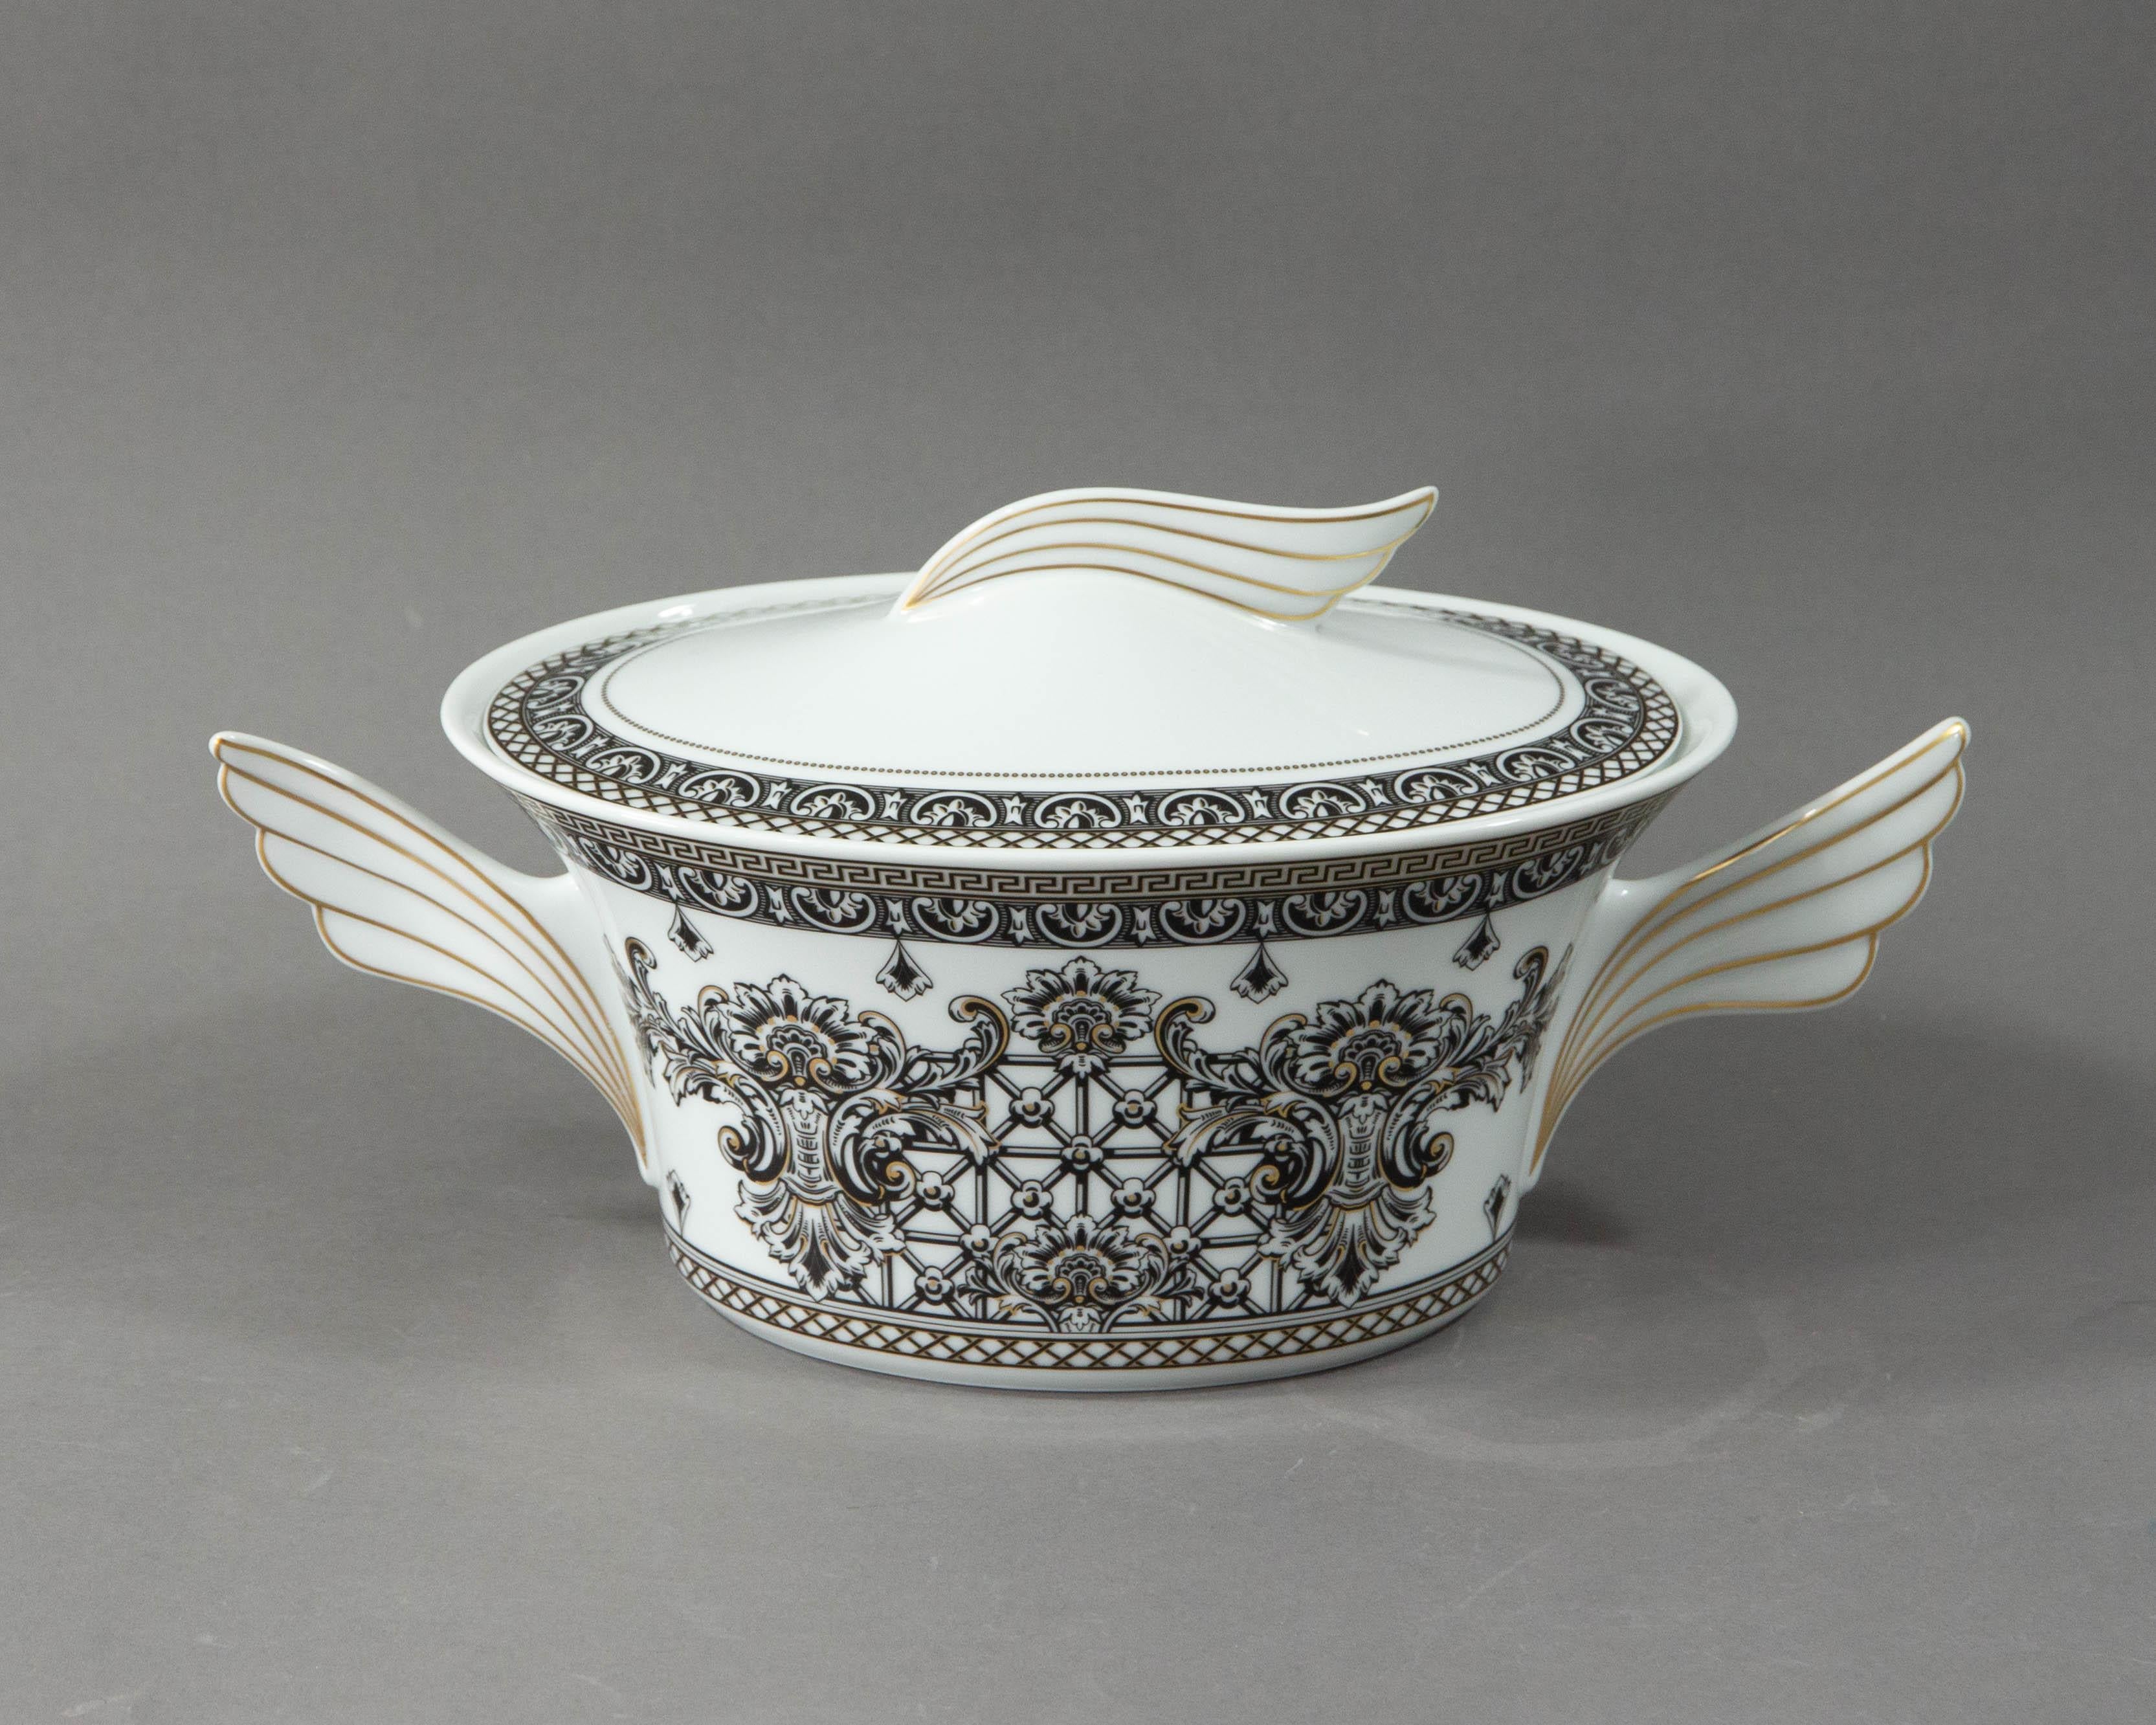 A lidded serving bowl or tureen made by Rosenthal belonging to the series Marqueterie, designed by Versace.

The form of the series is called Ikarus and was designed by Paul Wunderlich.

The series is decorated with attractive meandered gold